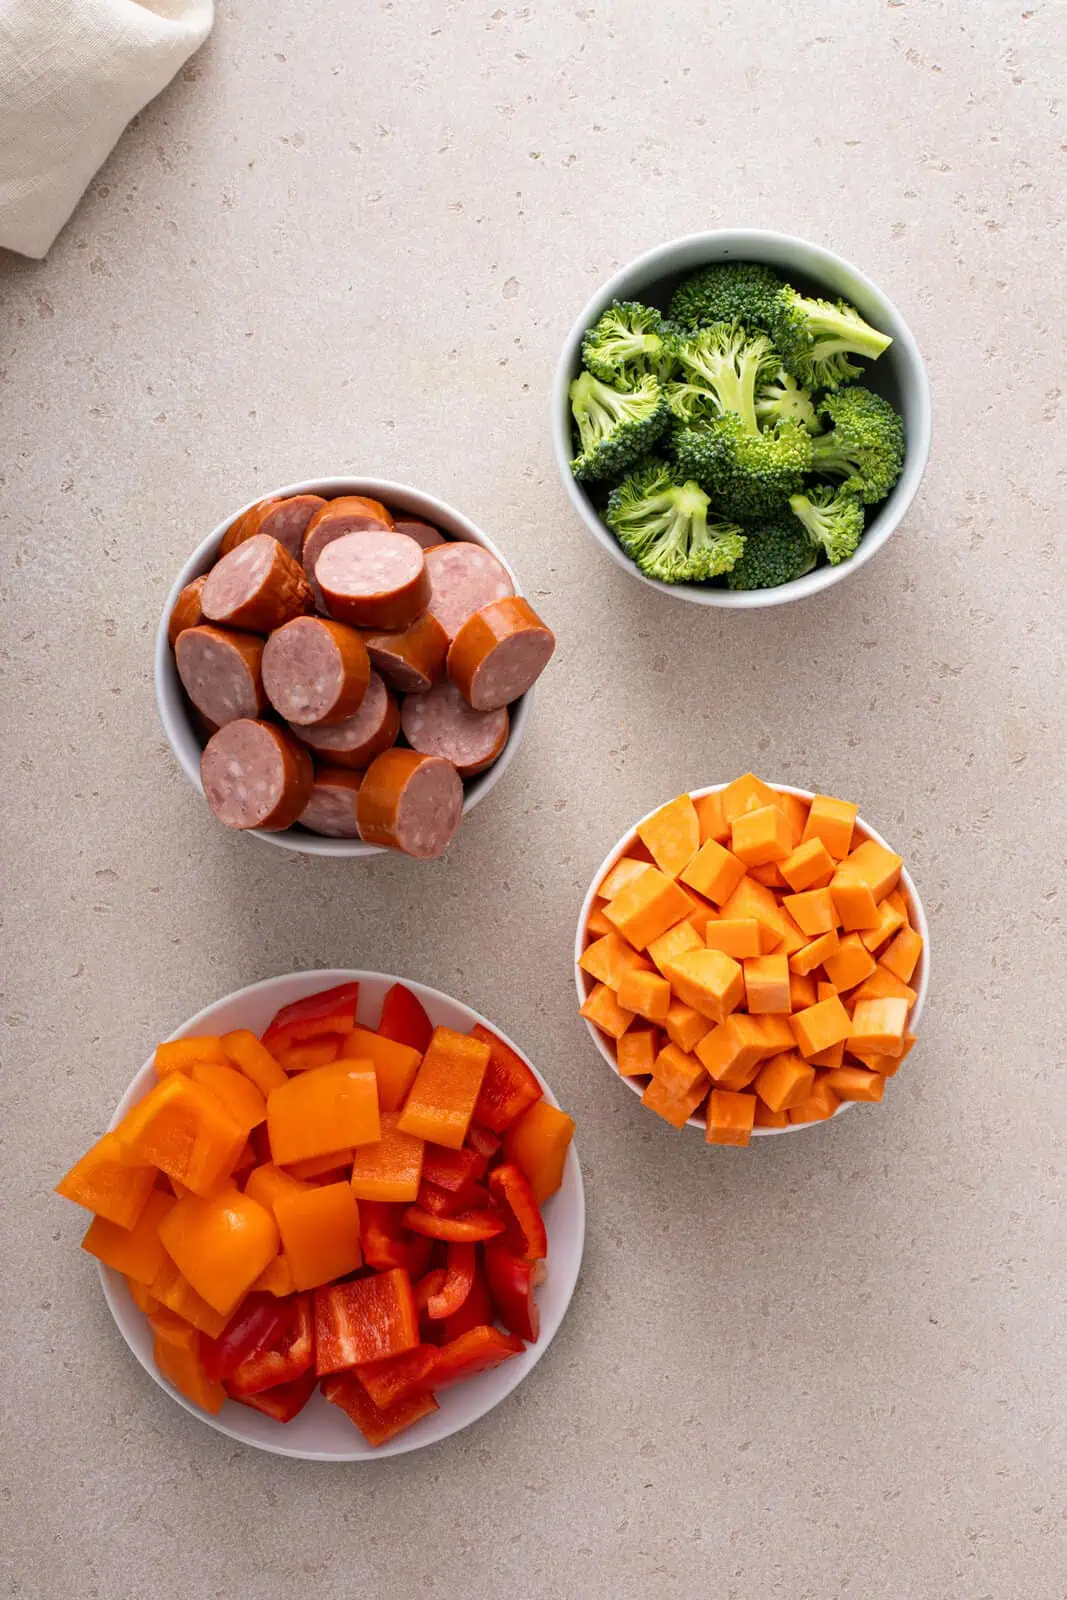 Bowls of sliced smoked sausage and cut-up vegetables.